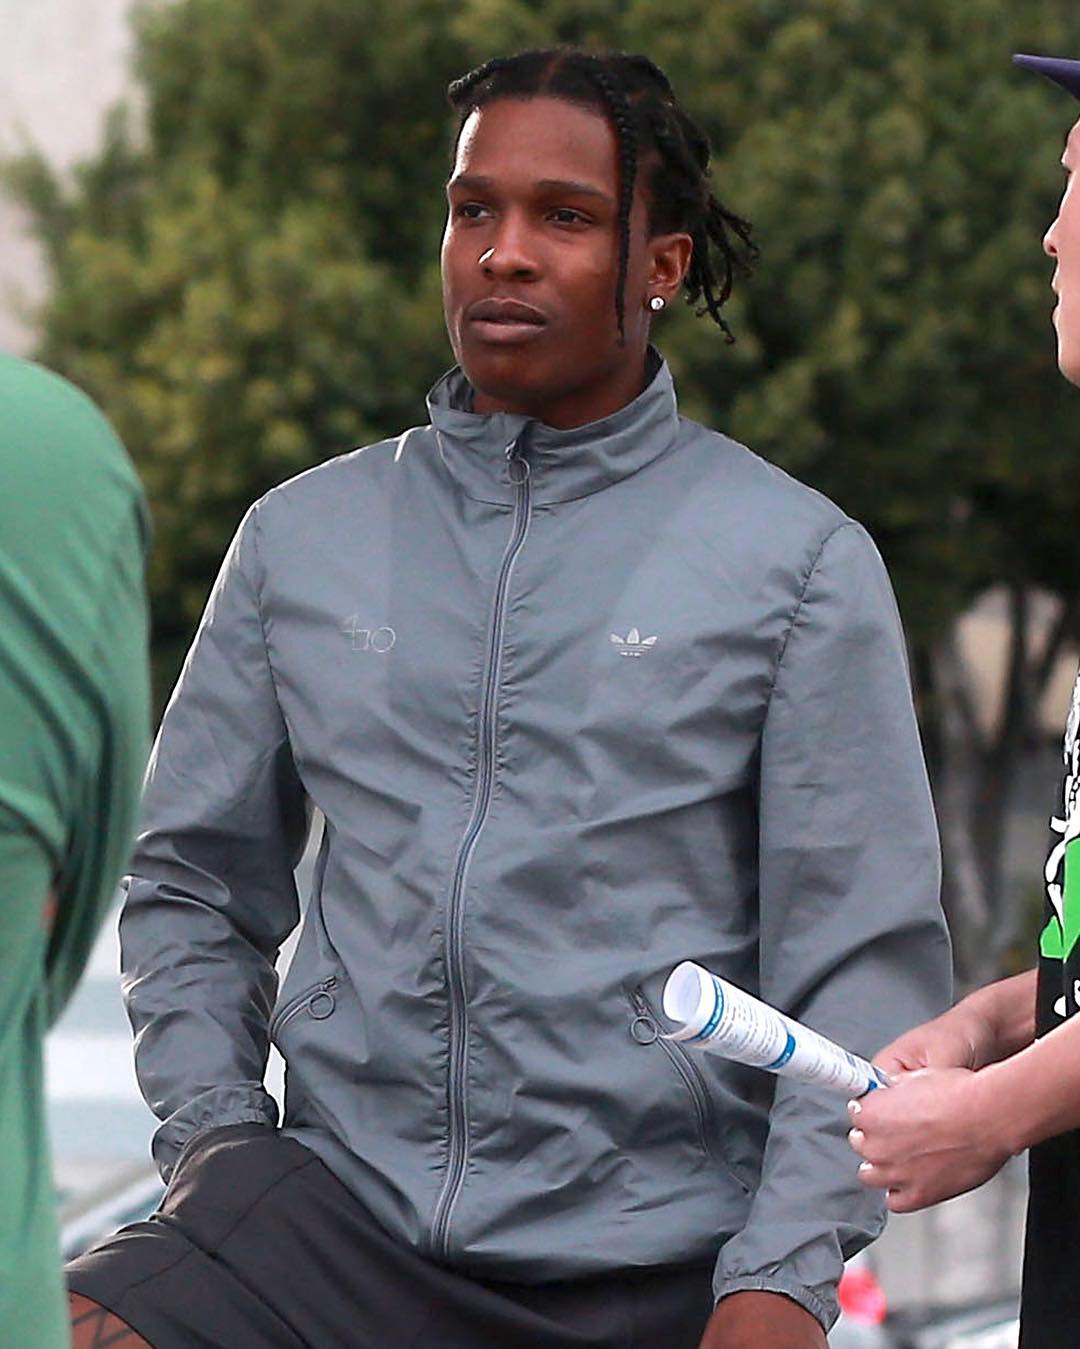 SPOTTED: A$AP Rocky In Adidas Jacket – PAUSE Online | Men's Street Style, Fashion News & Streetwear